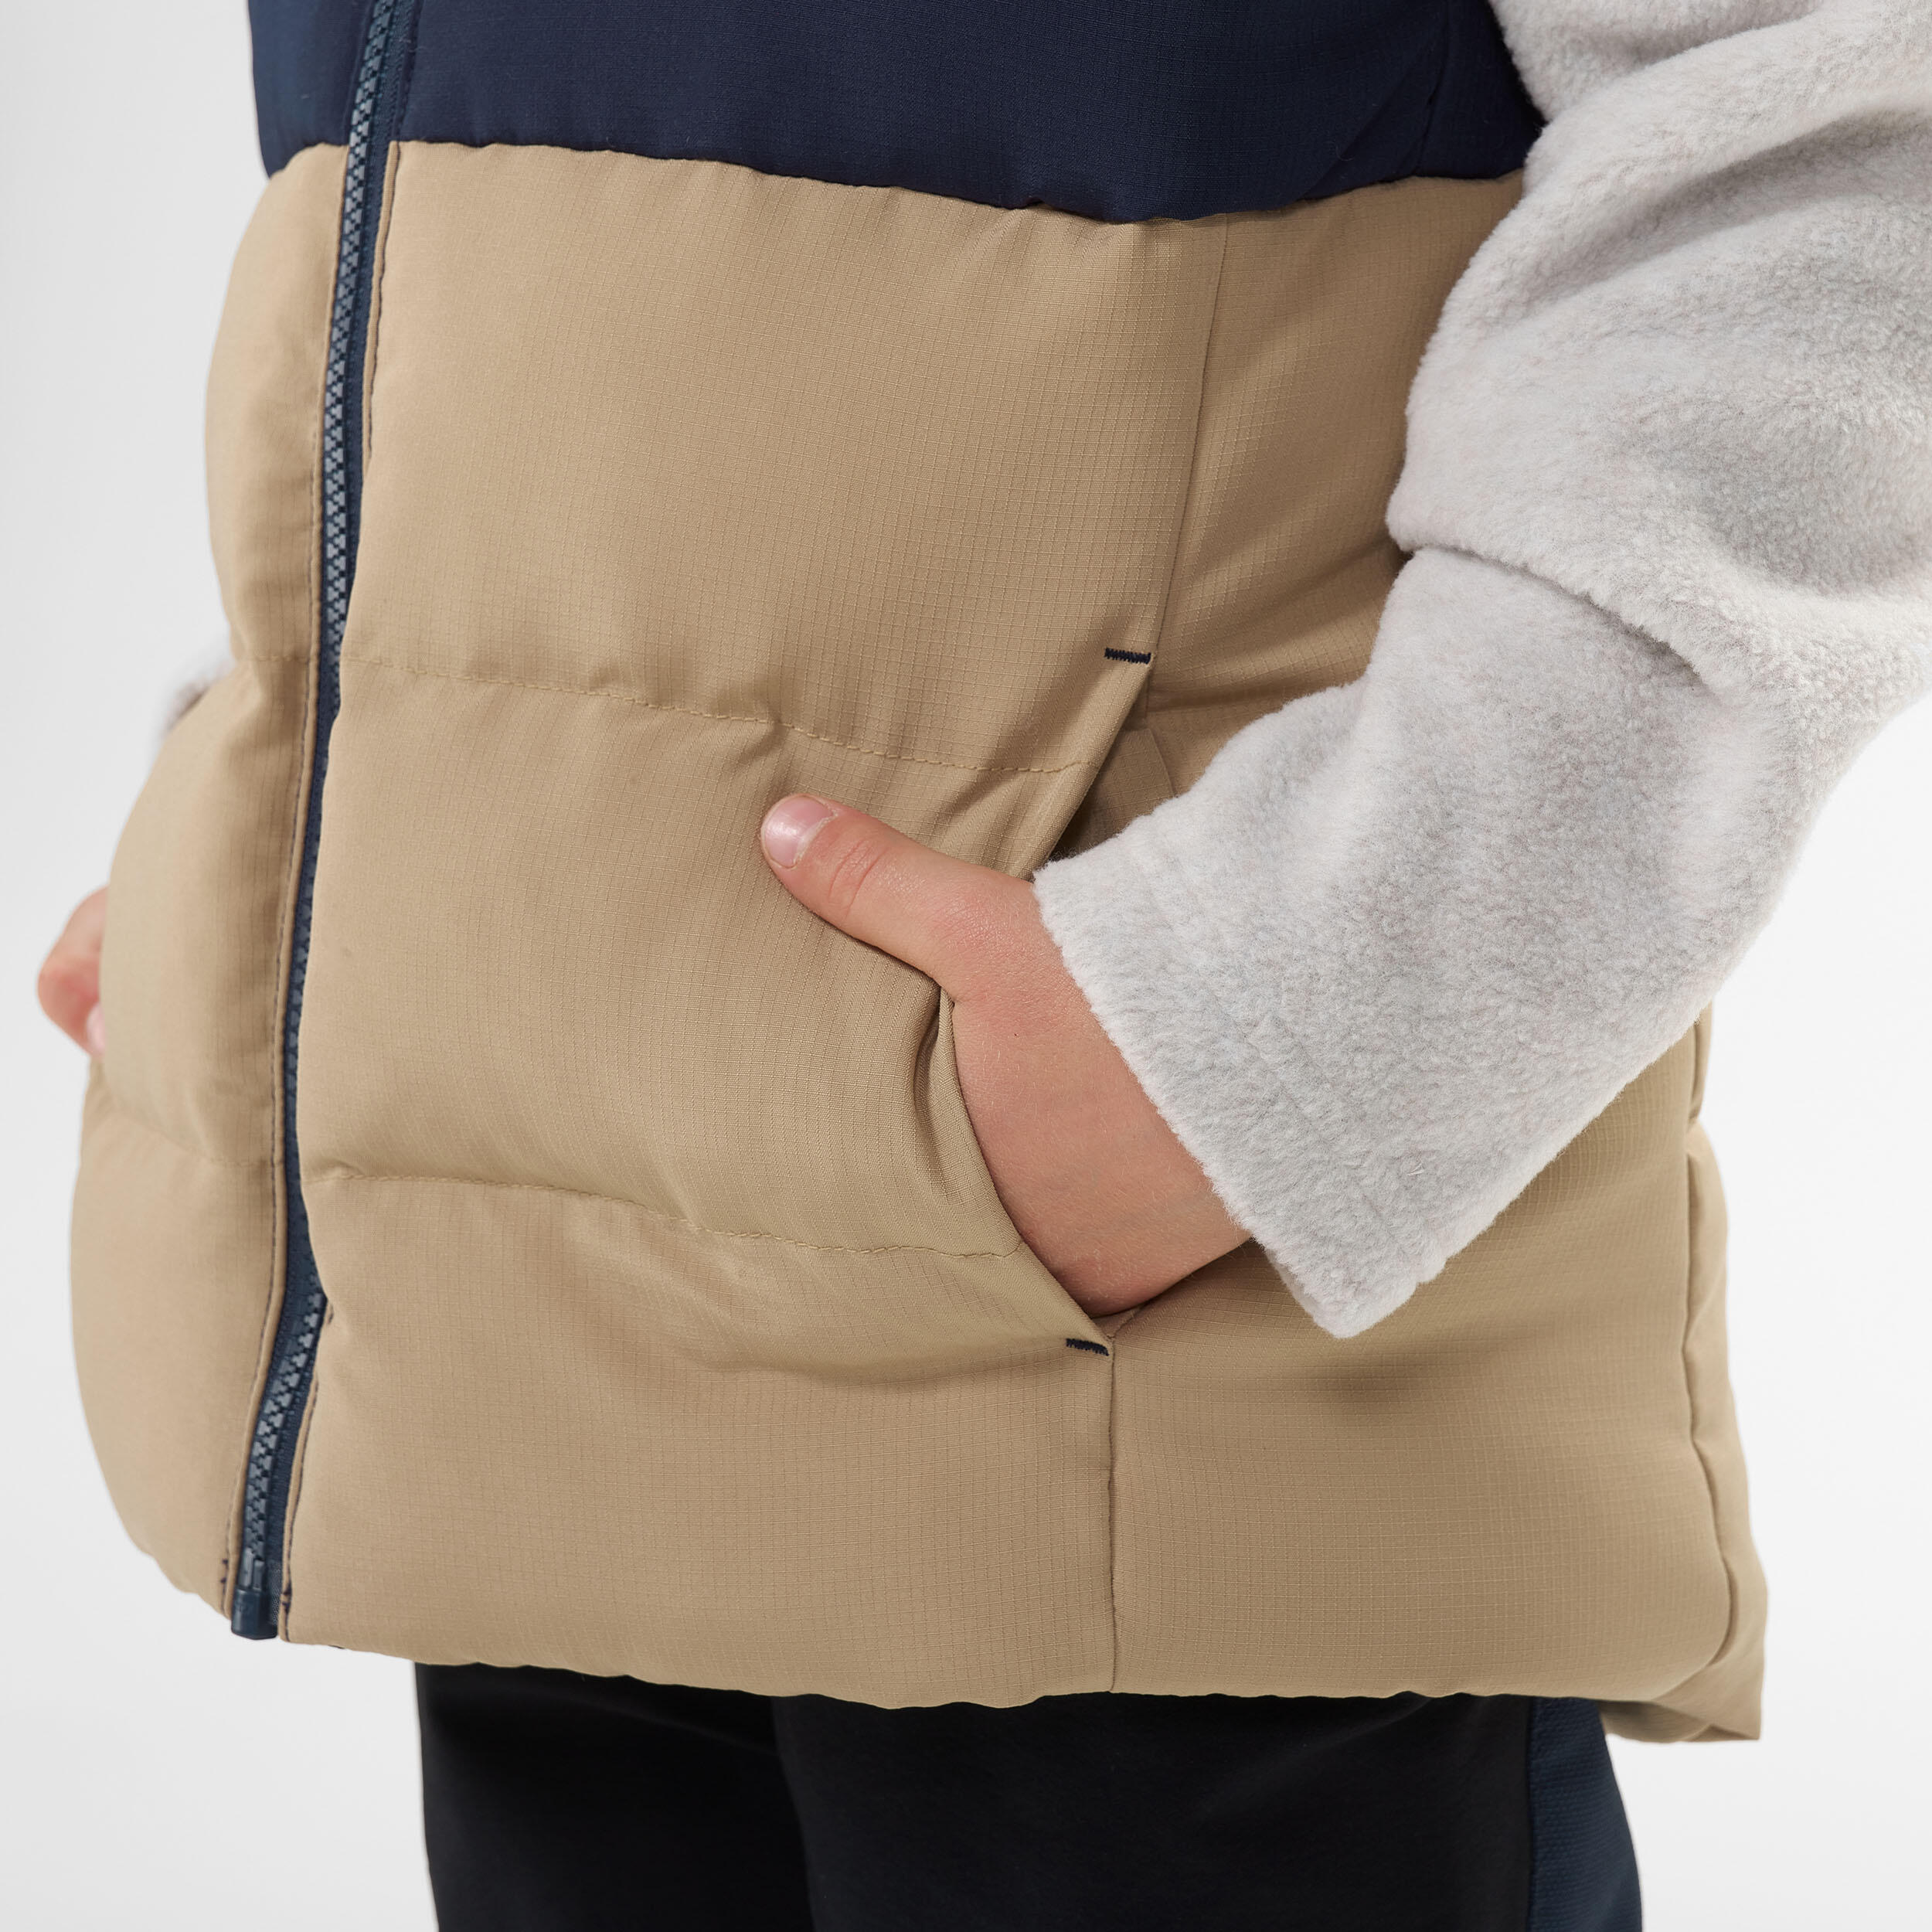 Kids’ Padded Hiking Gilet - Aged 2-6 - Beige and Blue 5/11